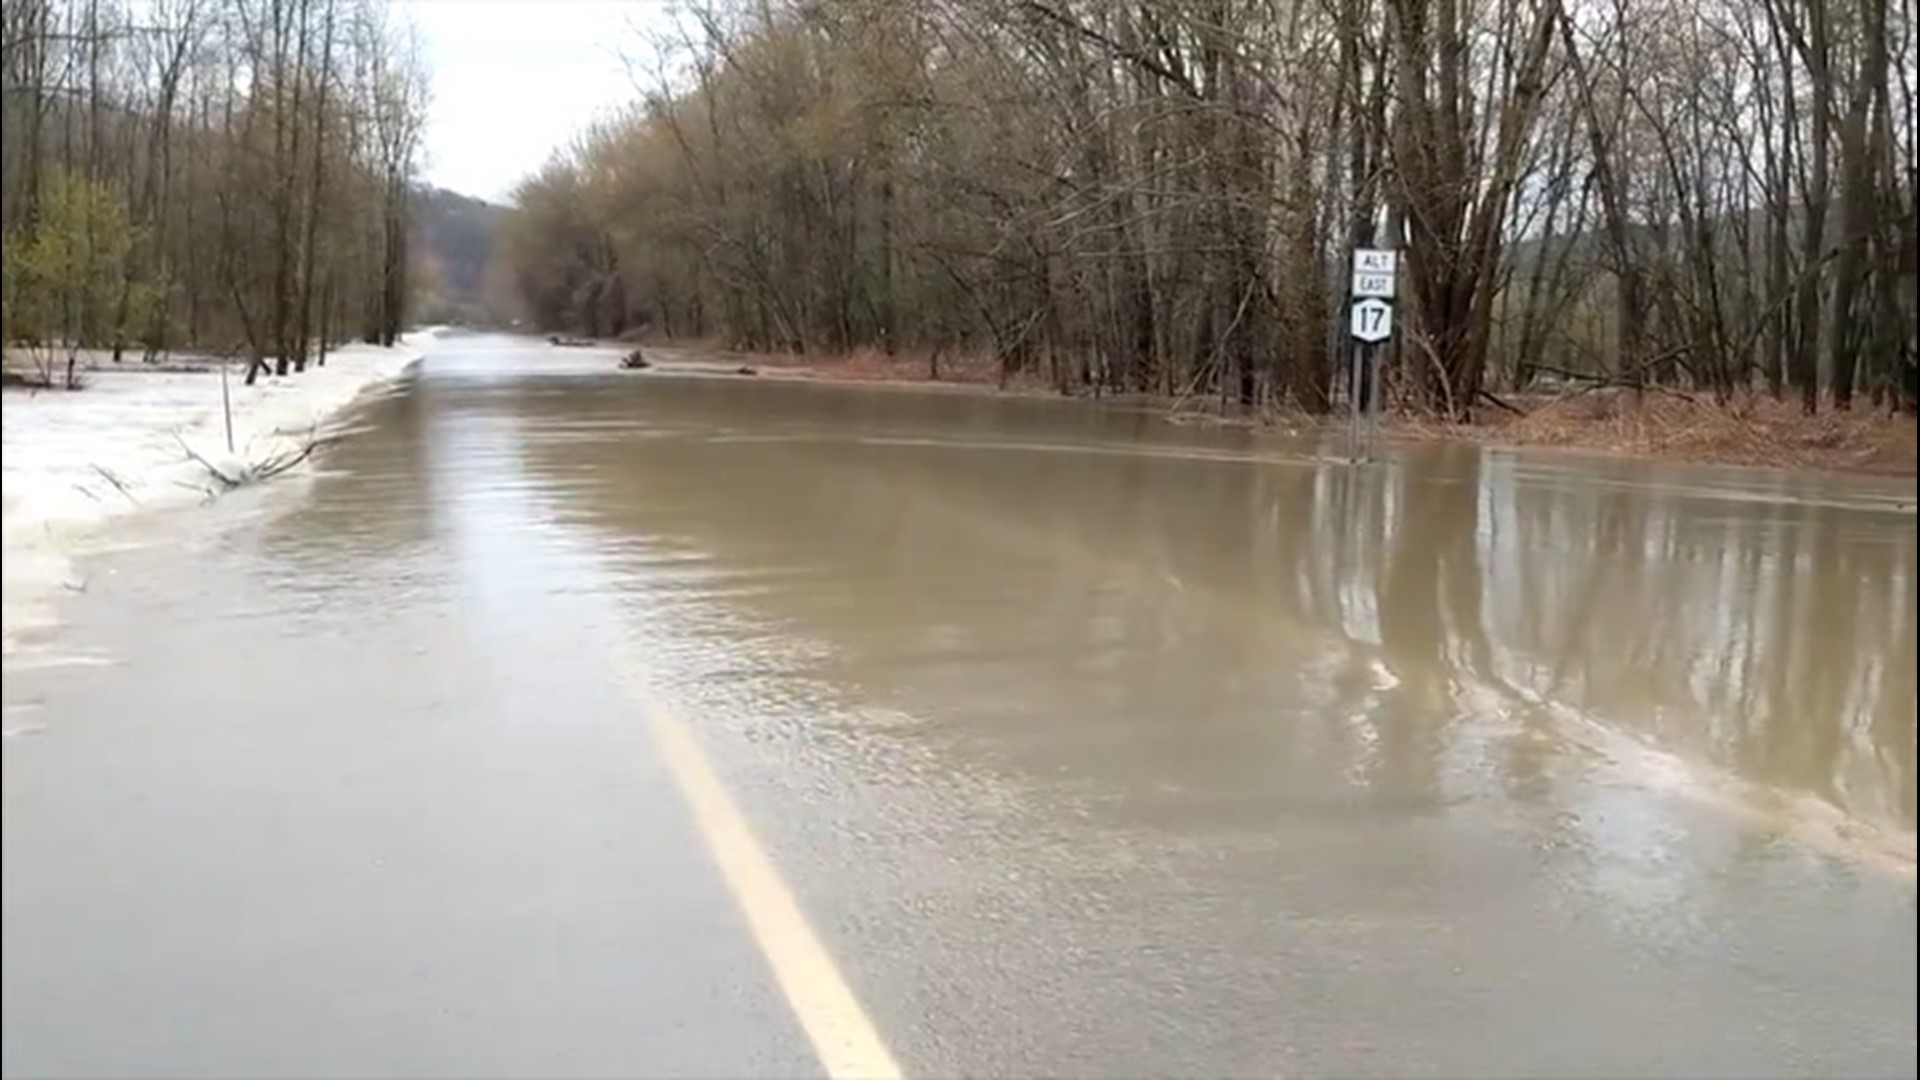 The flooded Chemung River, near Lowman, New York, made this road impassible on May 1. Remember, if you see something like this: turn around, don't drown!